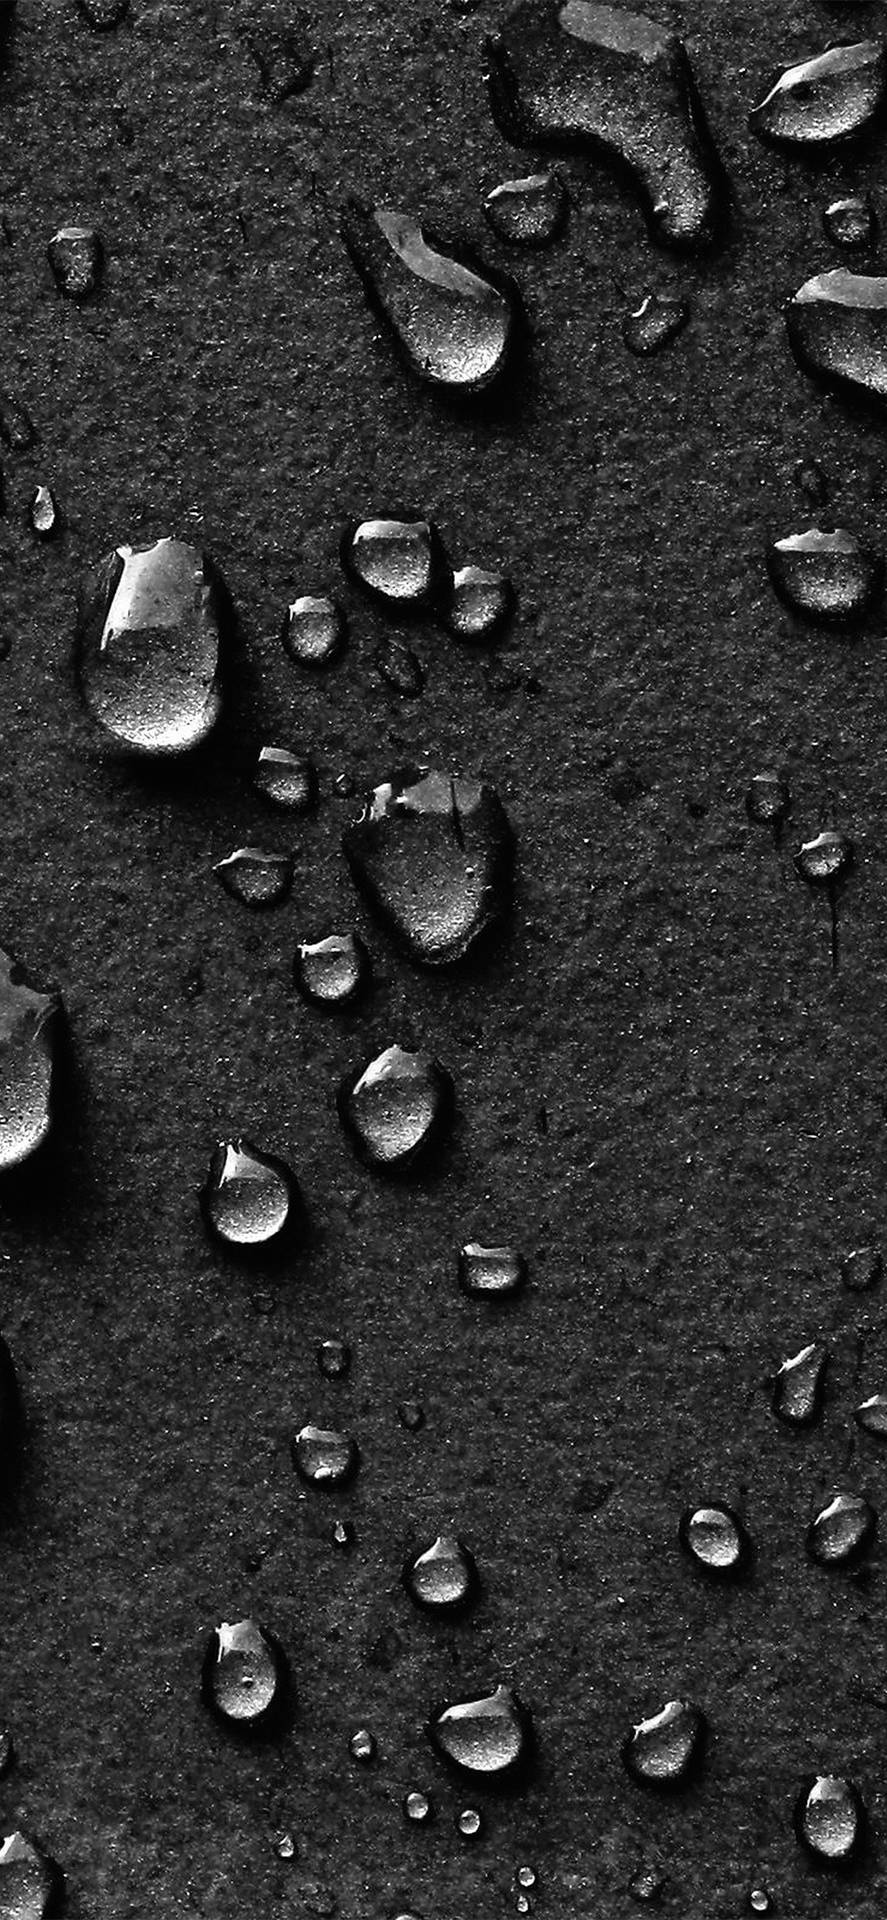 Download Black And White Photo Of Water Droplets On A Surface Wallpaper ...